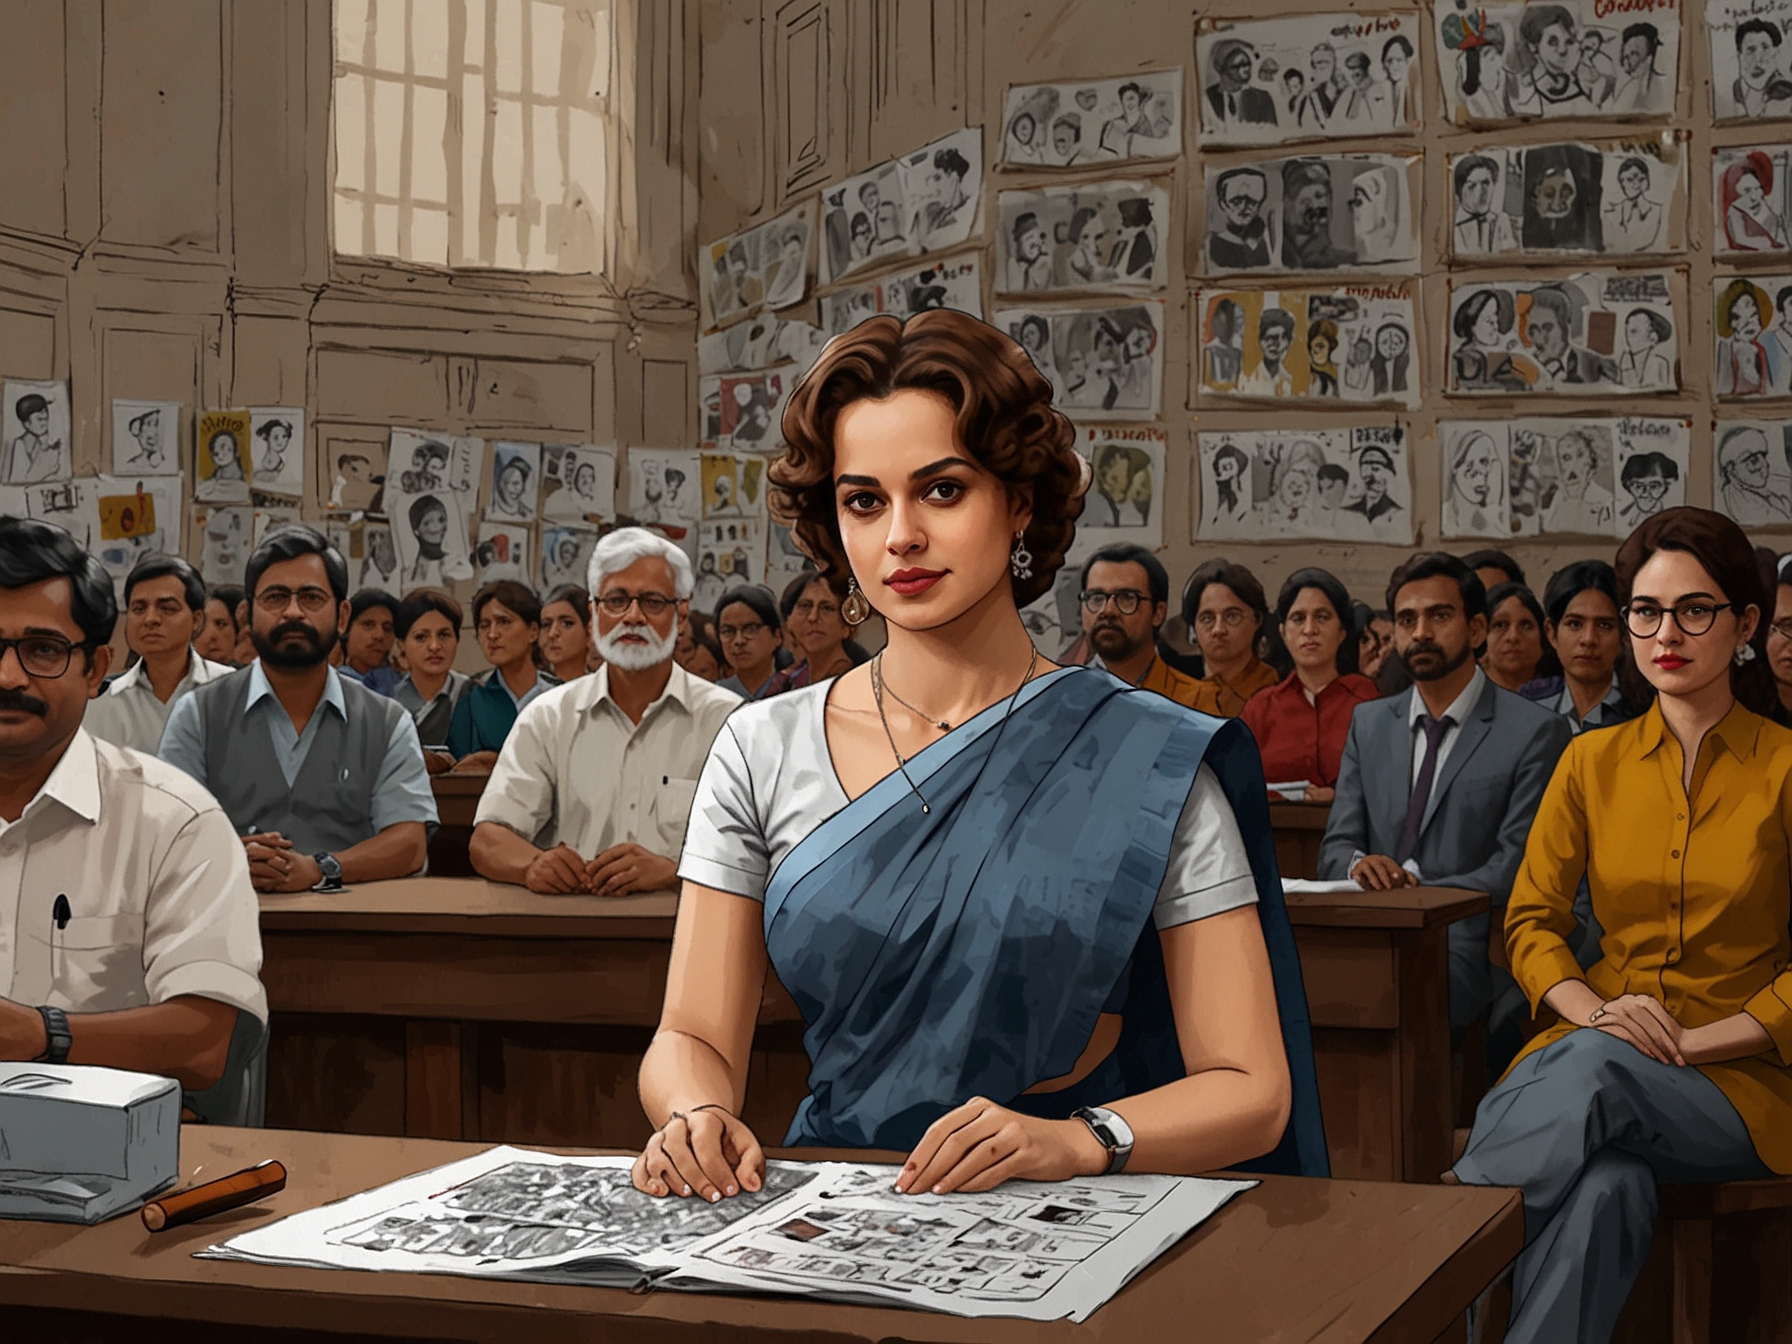 Social media platforms flooded with viral images and hashtags like #KanganaTrolled and #RespectParliament, illustrating public reaction to Kangana's actions.